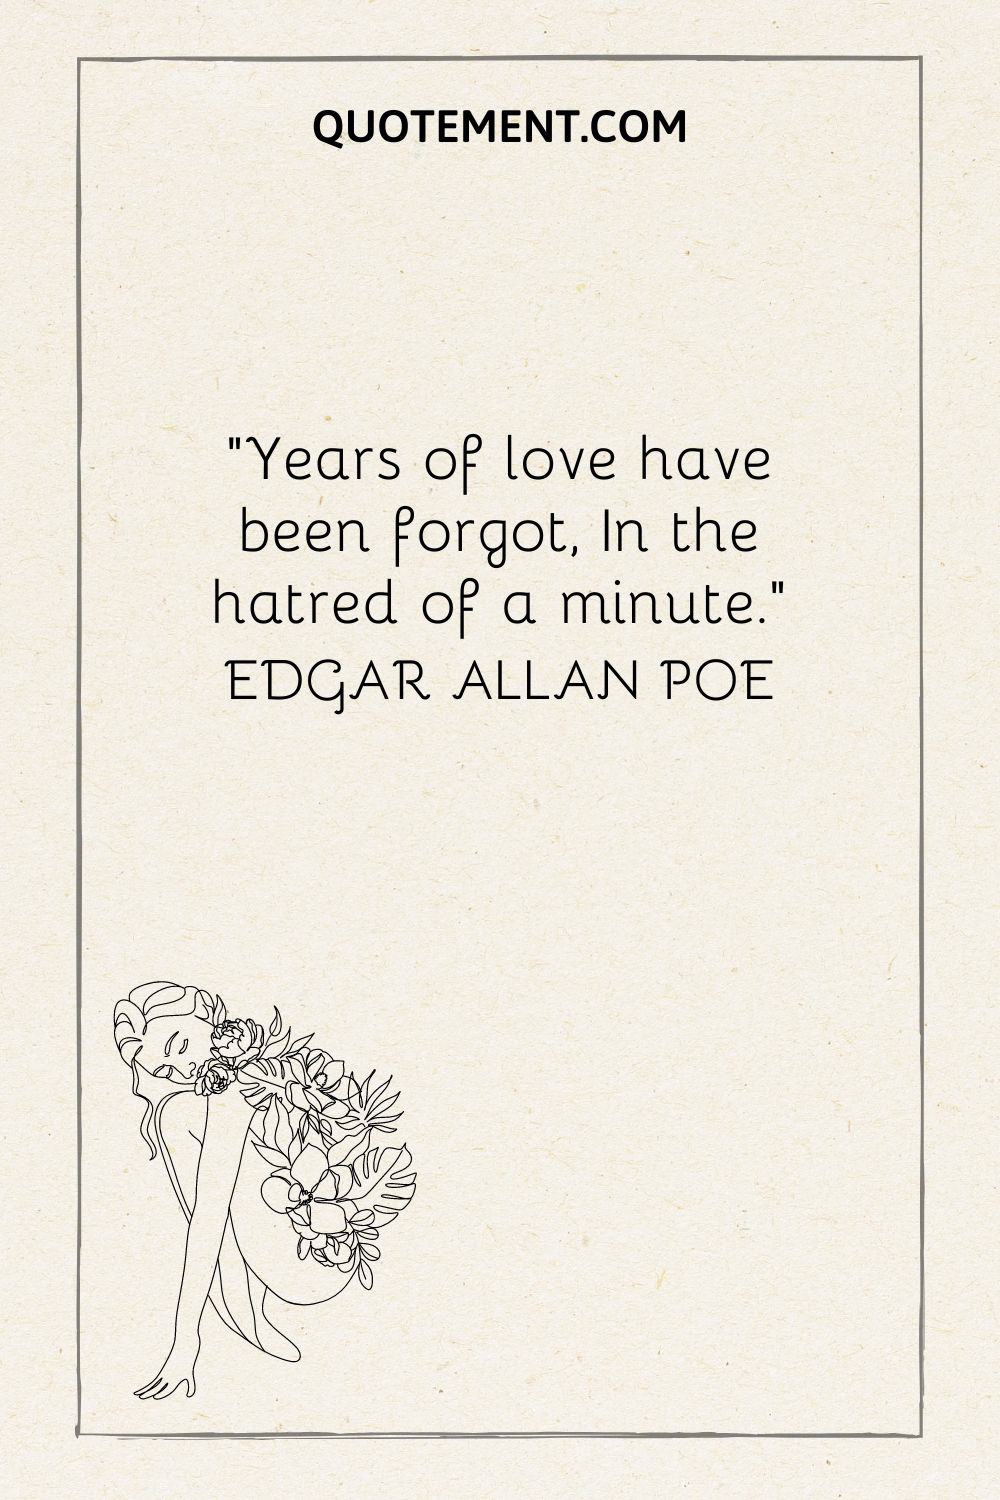 “Years of love have been forgot, In the hatred of a minute.” — Edgar Allan Poe